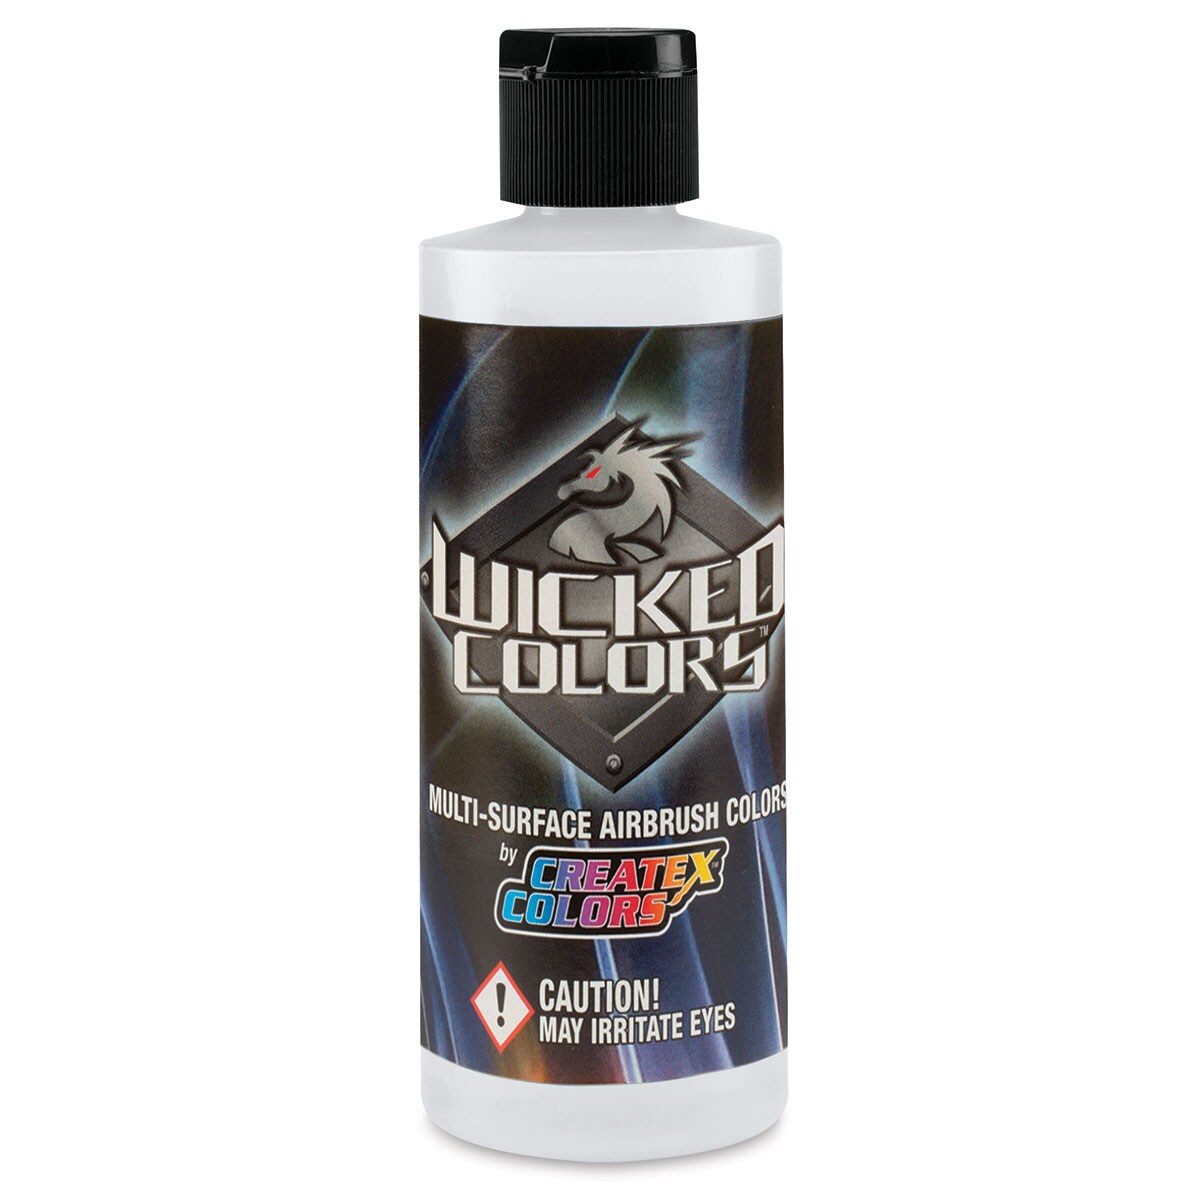 Createx Wicked Colors Airbrush Color - 4 oz Opaque White